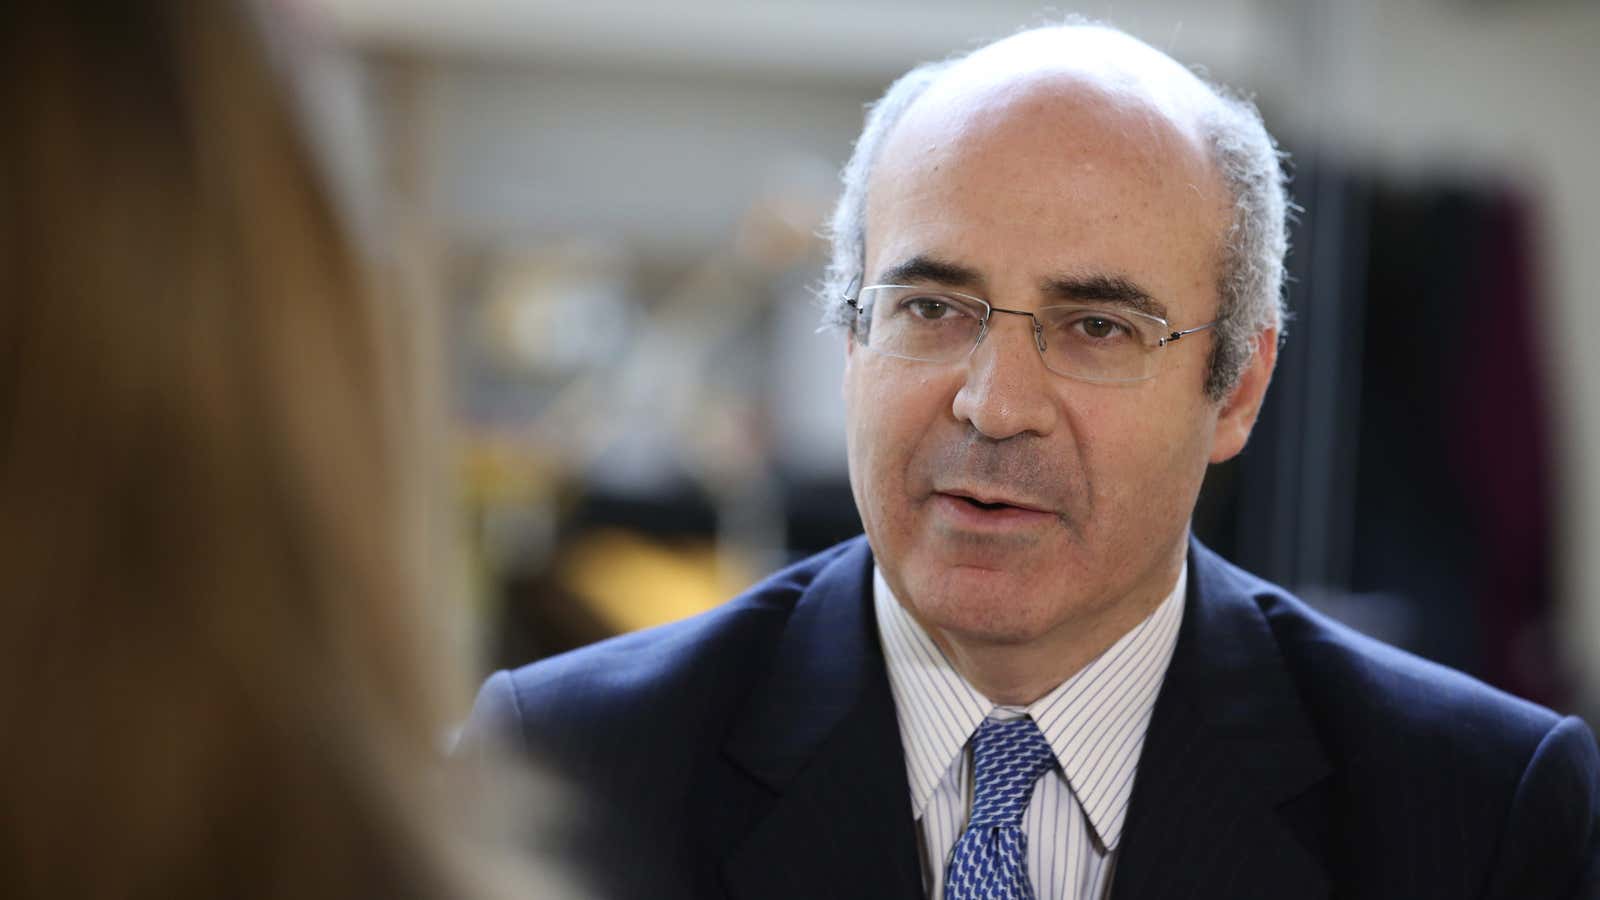 Russia has tried five times to arrest Bill Browder, a financier who has spent years campaigning against Putin’s government.